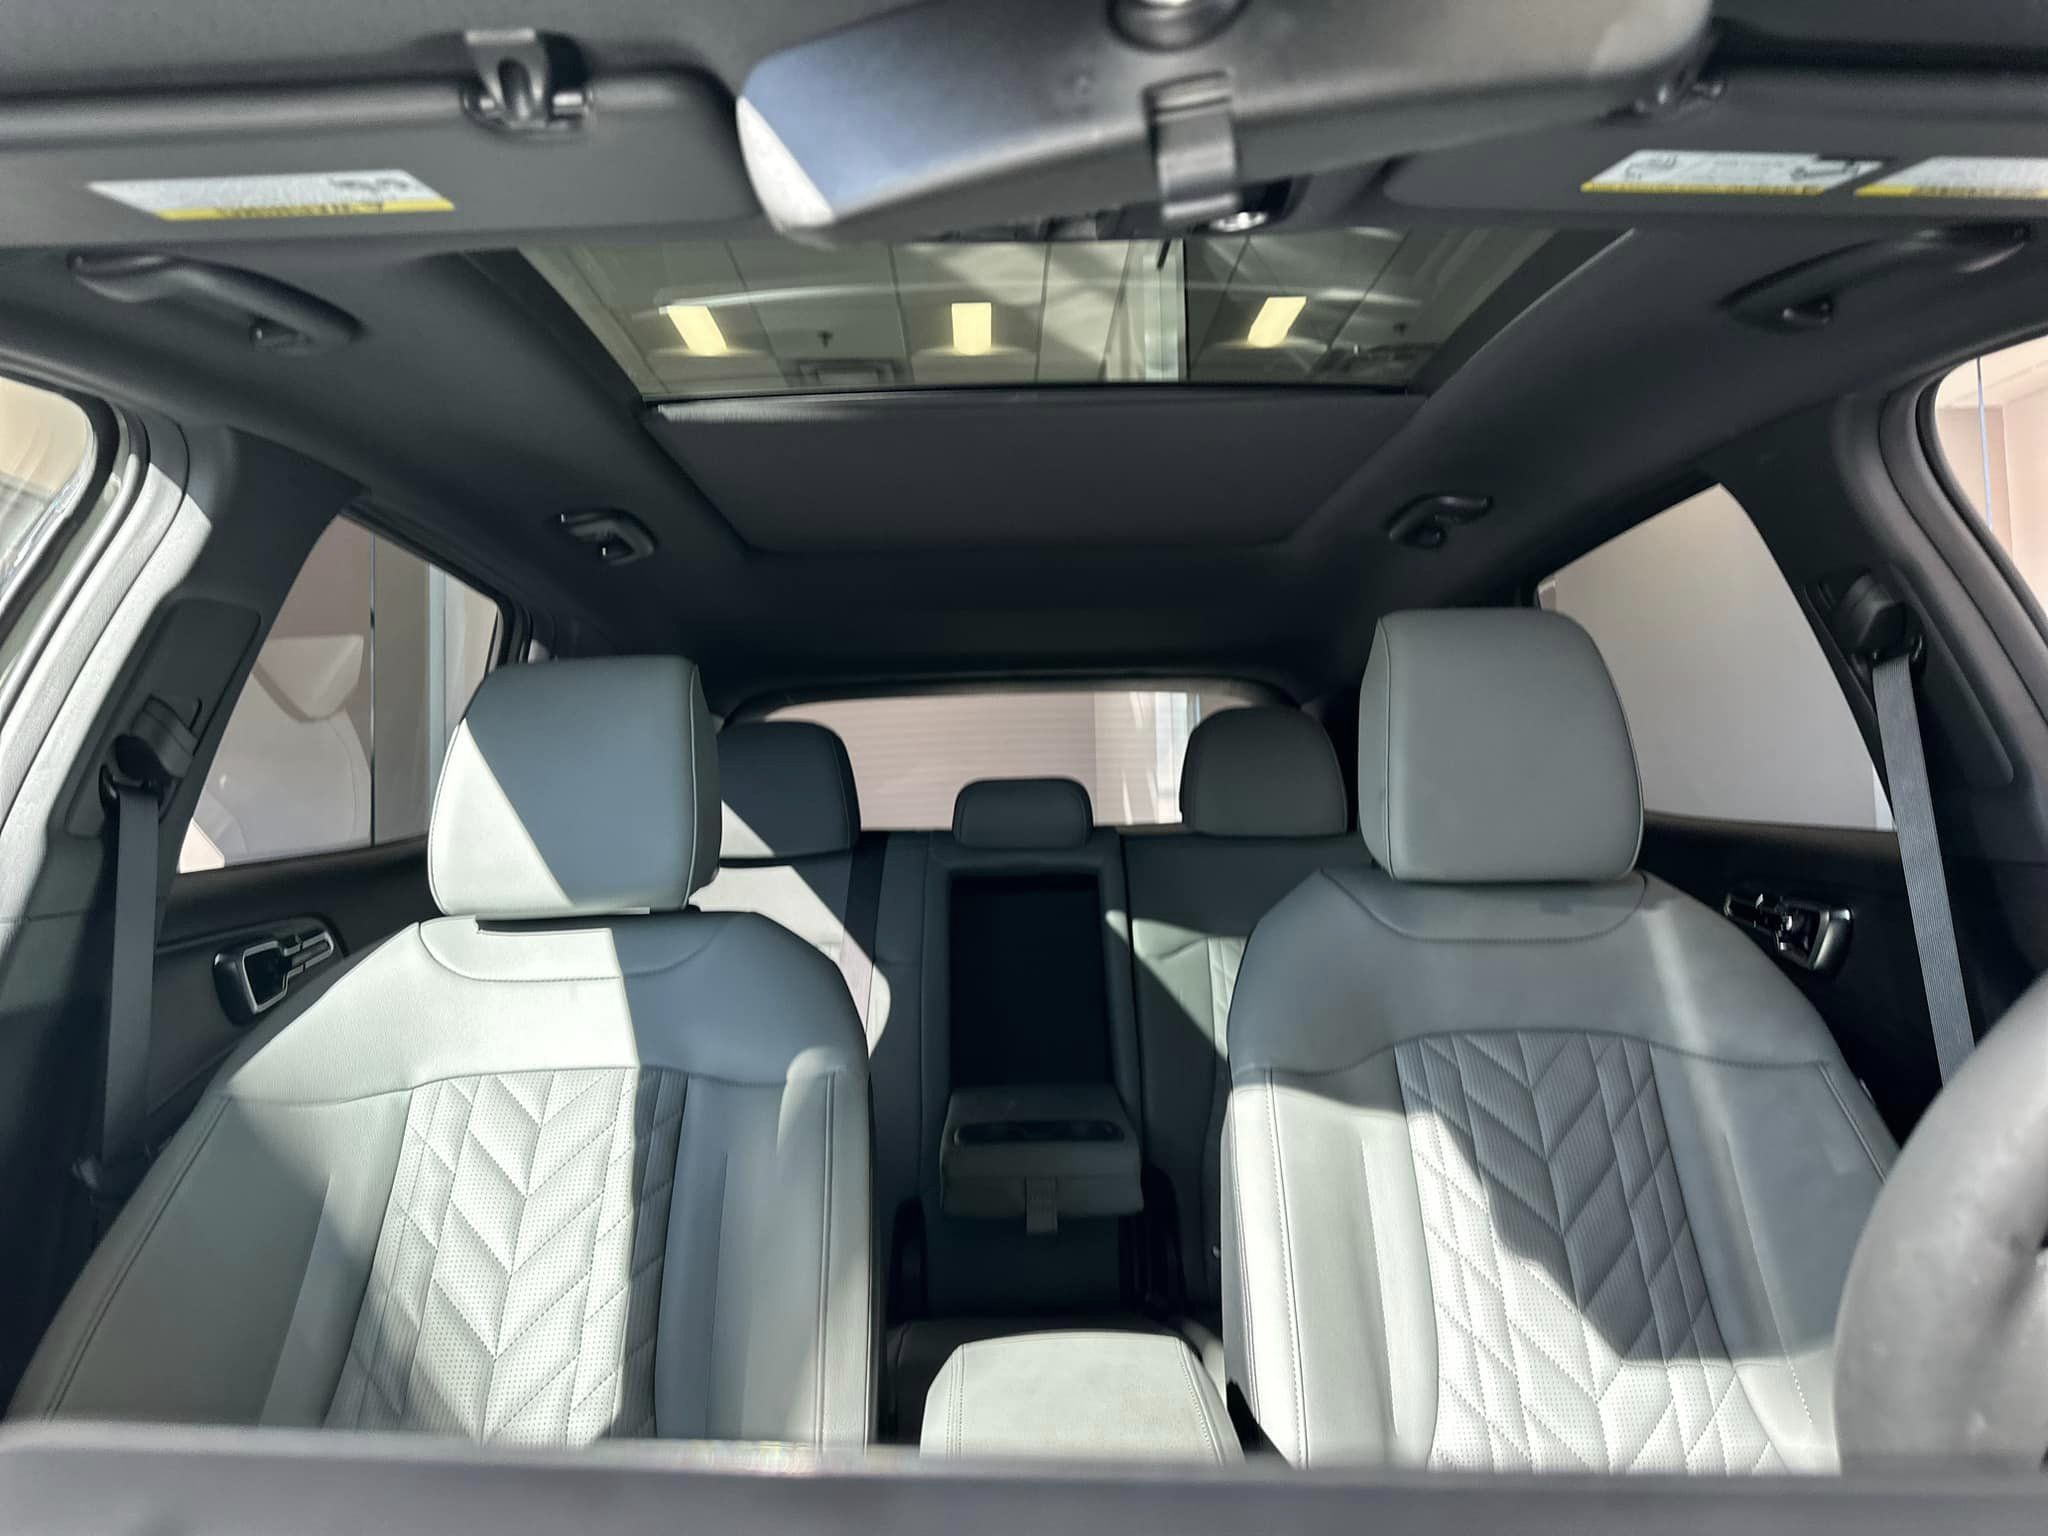 2023 Kia Sportage - Jungle Green - X-Pro Prestige Trim - Inside View Showing Panoramic Sun Roof or Moon Roof